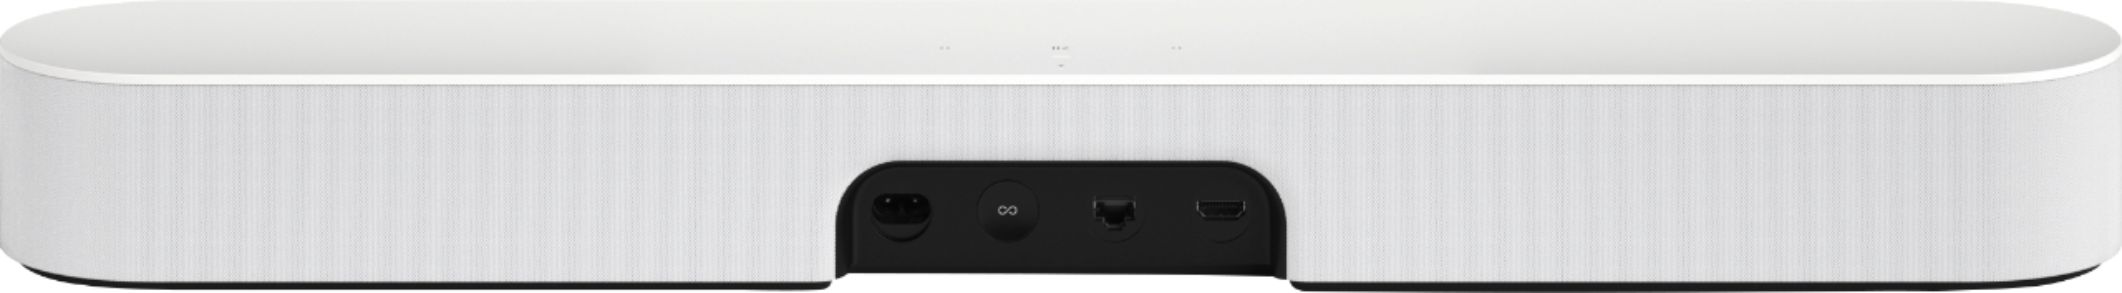 Back View: Sonos - Short Straight Power Cable for Five, Beam, and Amp - Black